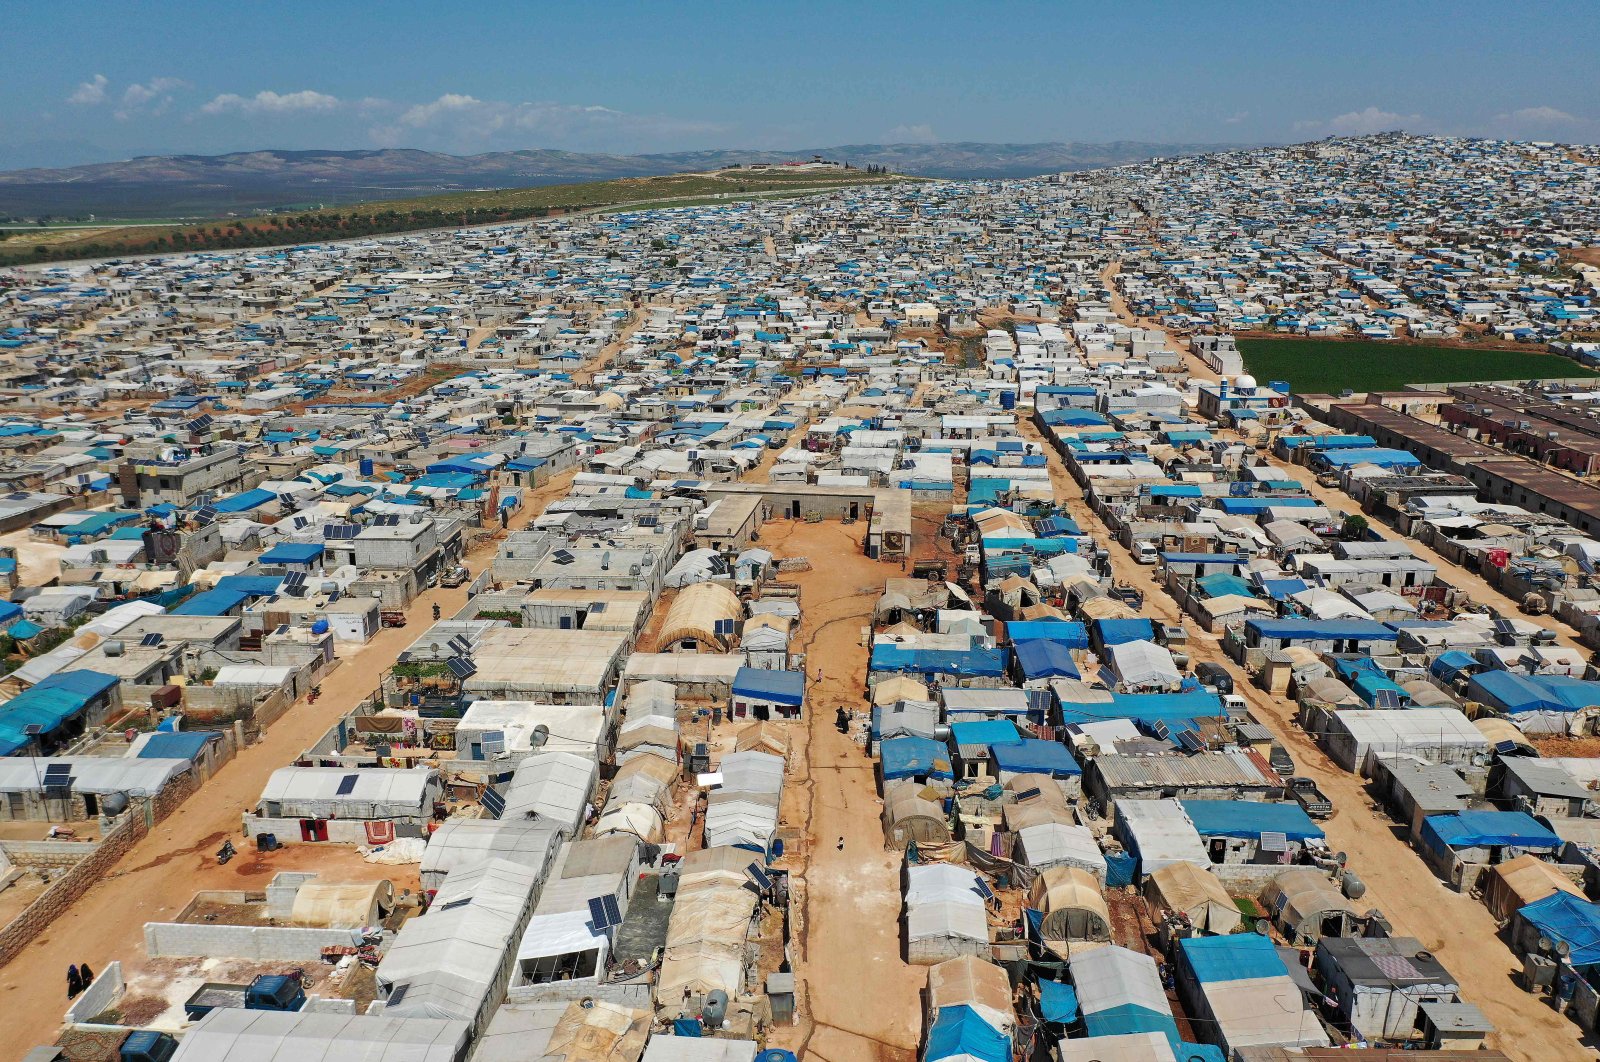 An aerial view shows the Atme camp for displaced Syrians close to the border with Turkey in Syria's northwestern Idlib province, on April 19, 2020. (AFP)